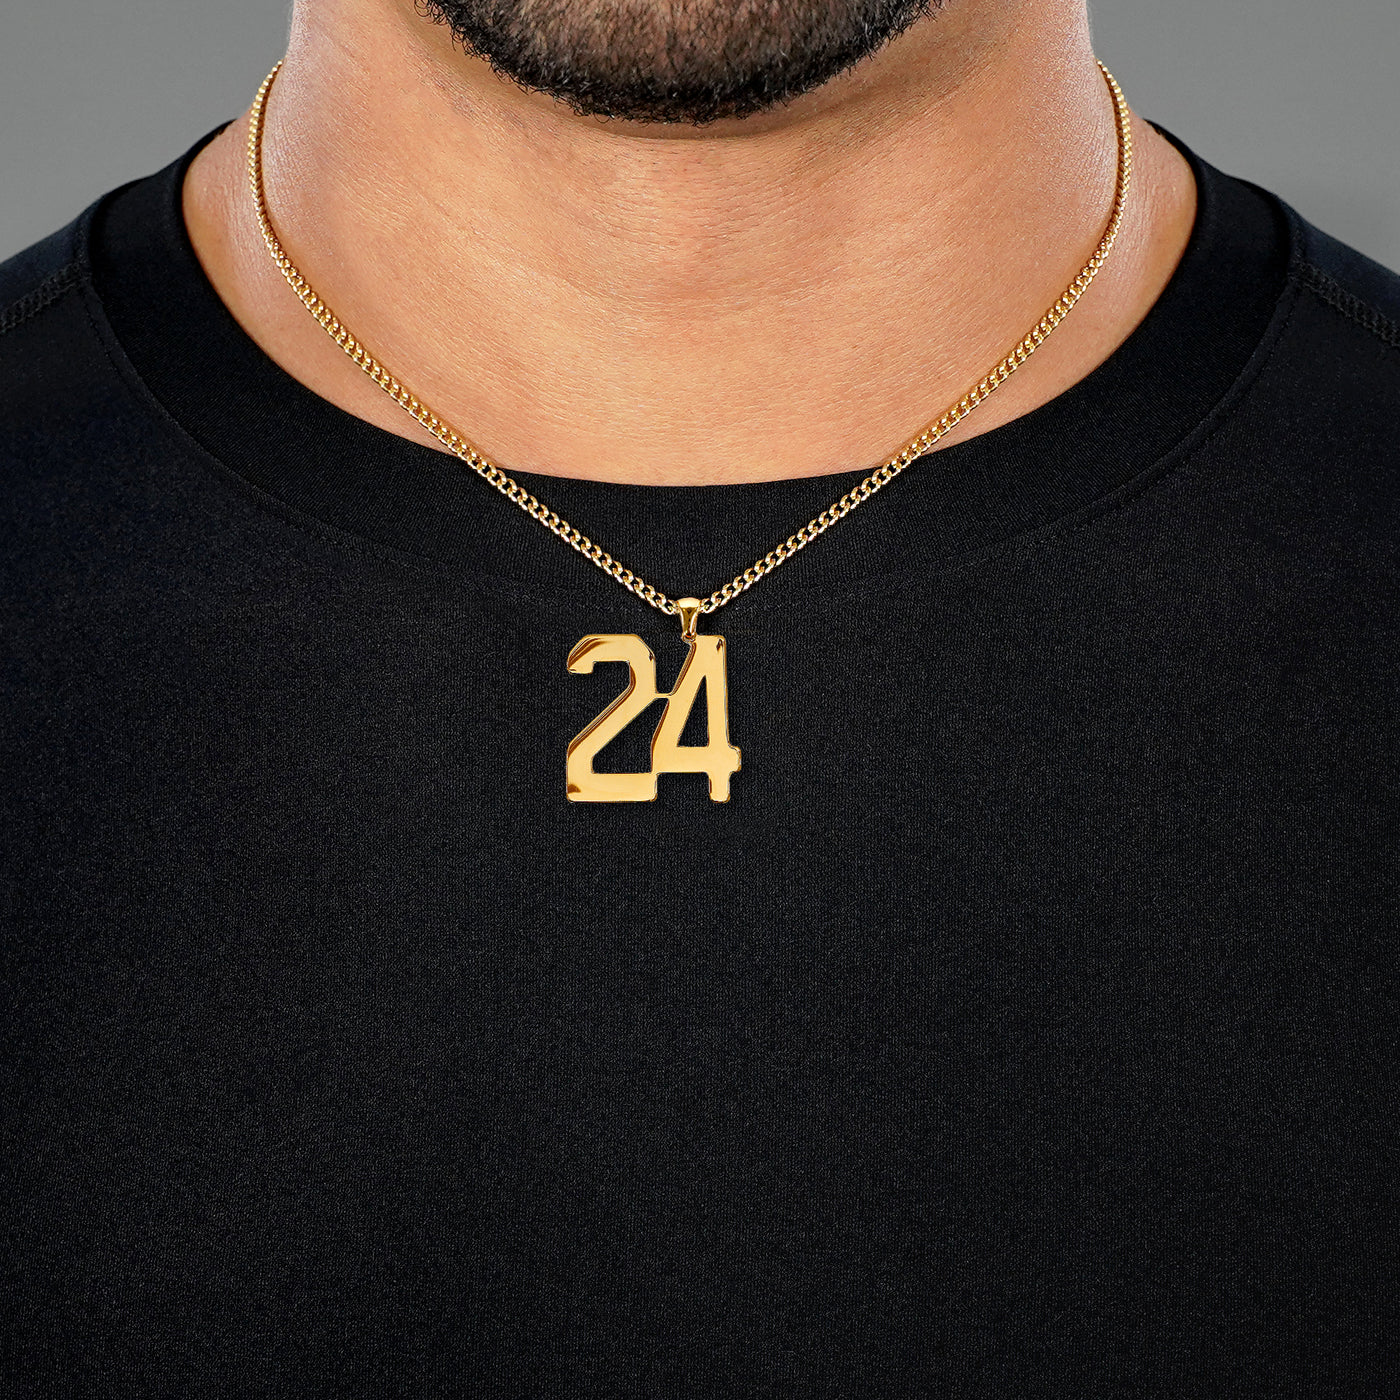 24 Number Pendant with Chain Necklace - Gold Plated Stainless Steel